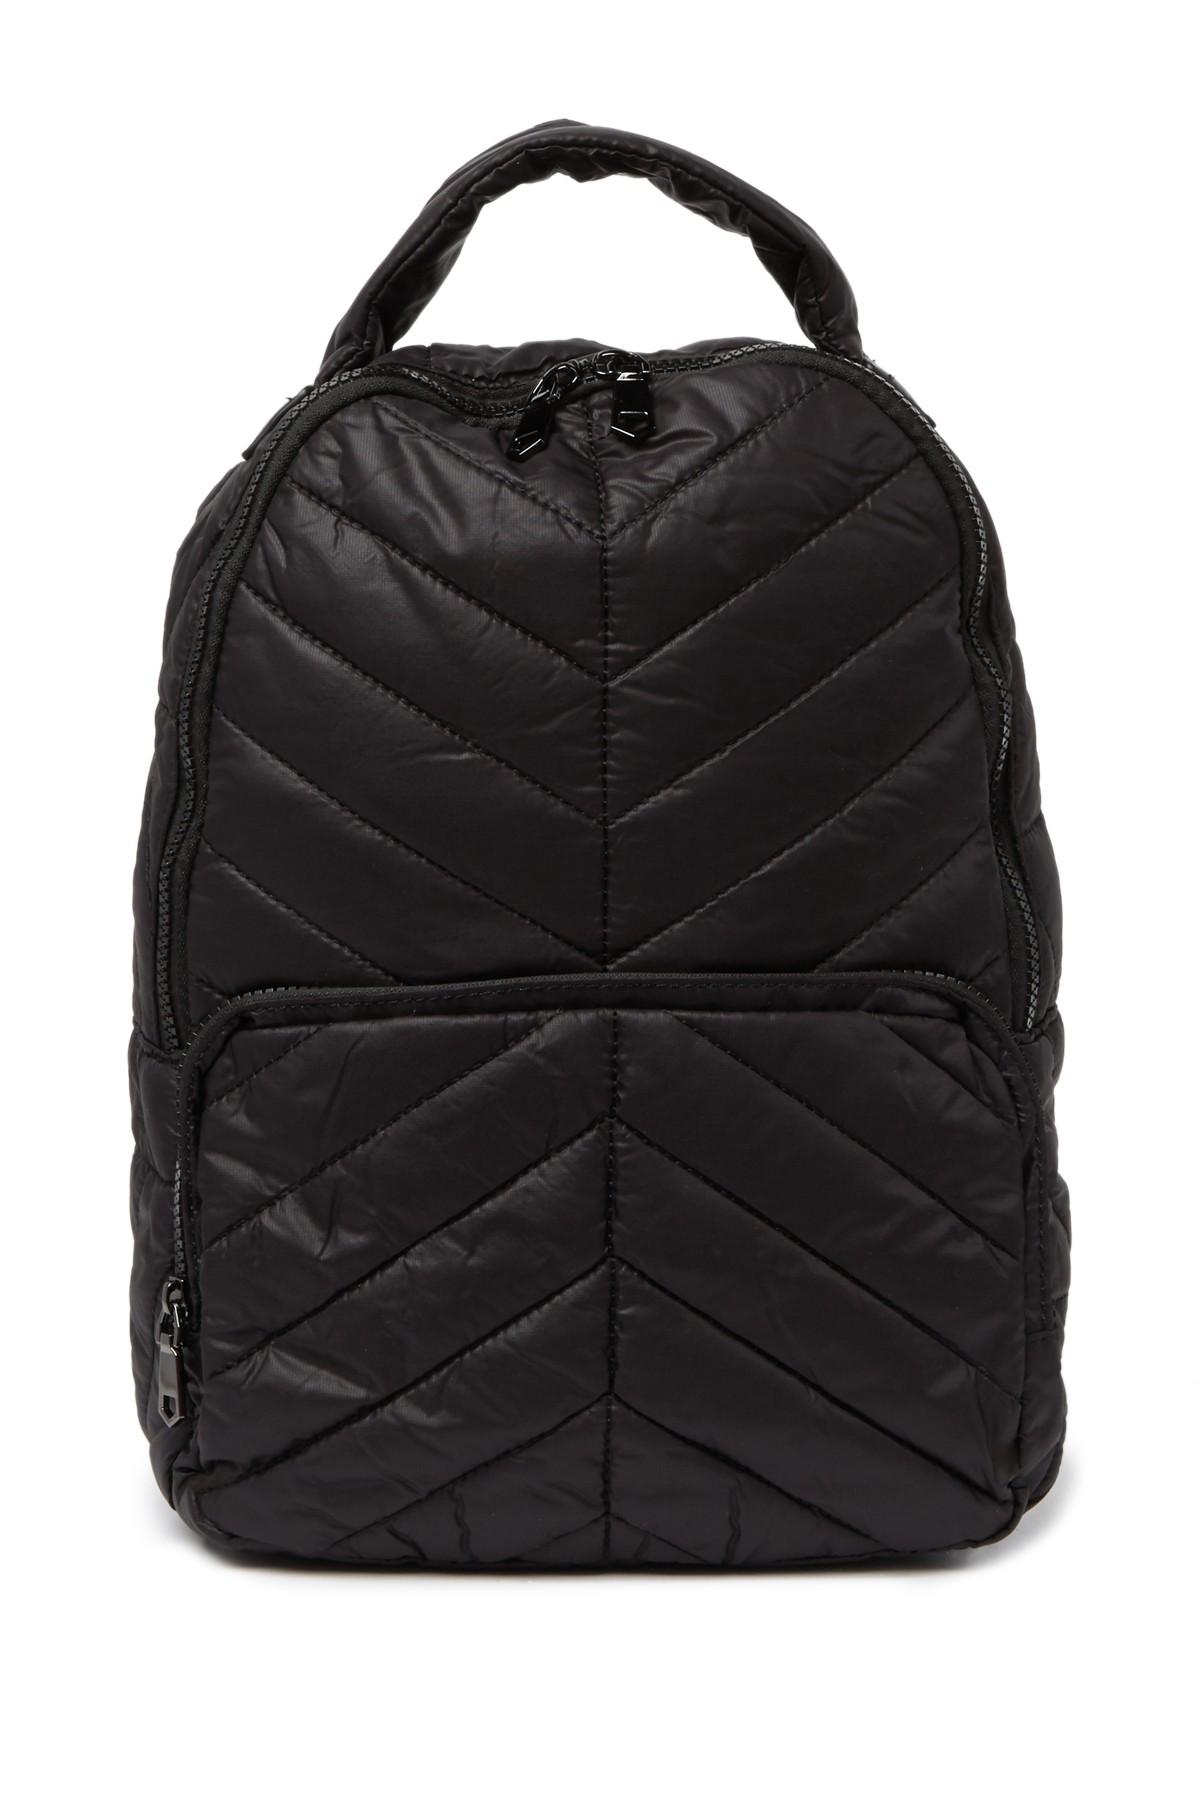 Urban Expressions High Shine Quilted Puffer Backpack in Black | Lyst